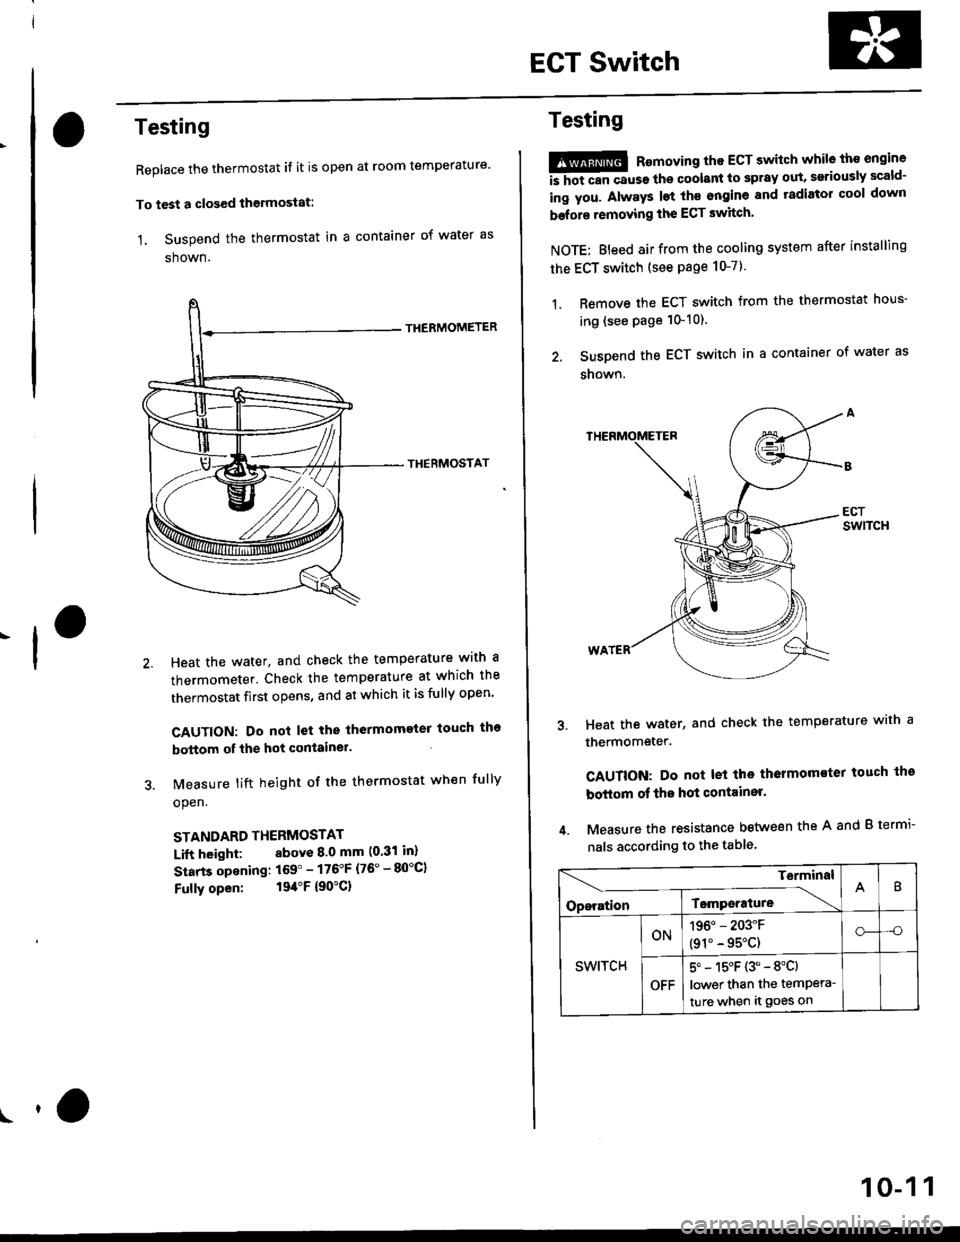 HONDA CIVIC 1999 6.G User Guide EGT Switch
-f
Testing
Replace the thermostat if it is open at room temperature
To test a closed thermostat:
1, Suspend the thermostat in a container of water as
shown.
THEBMOMETER
THERMOSTAT
Heat the